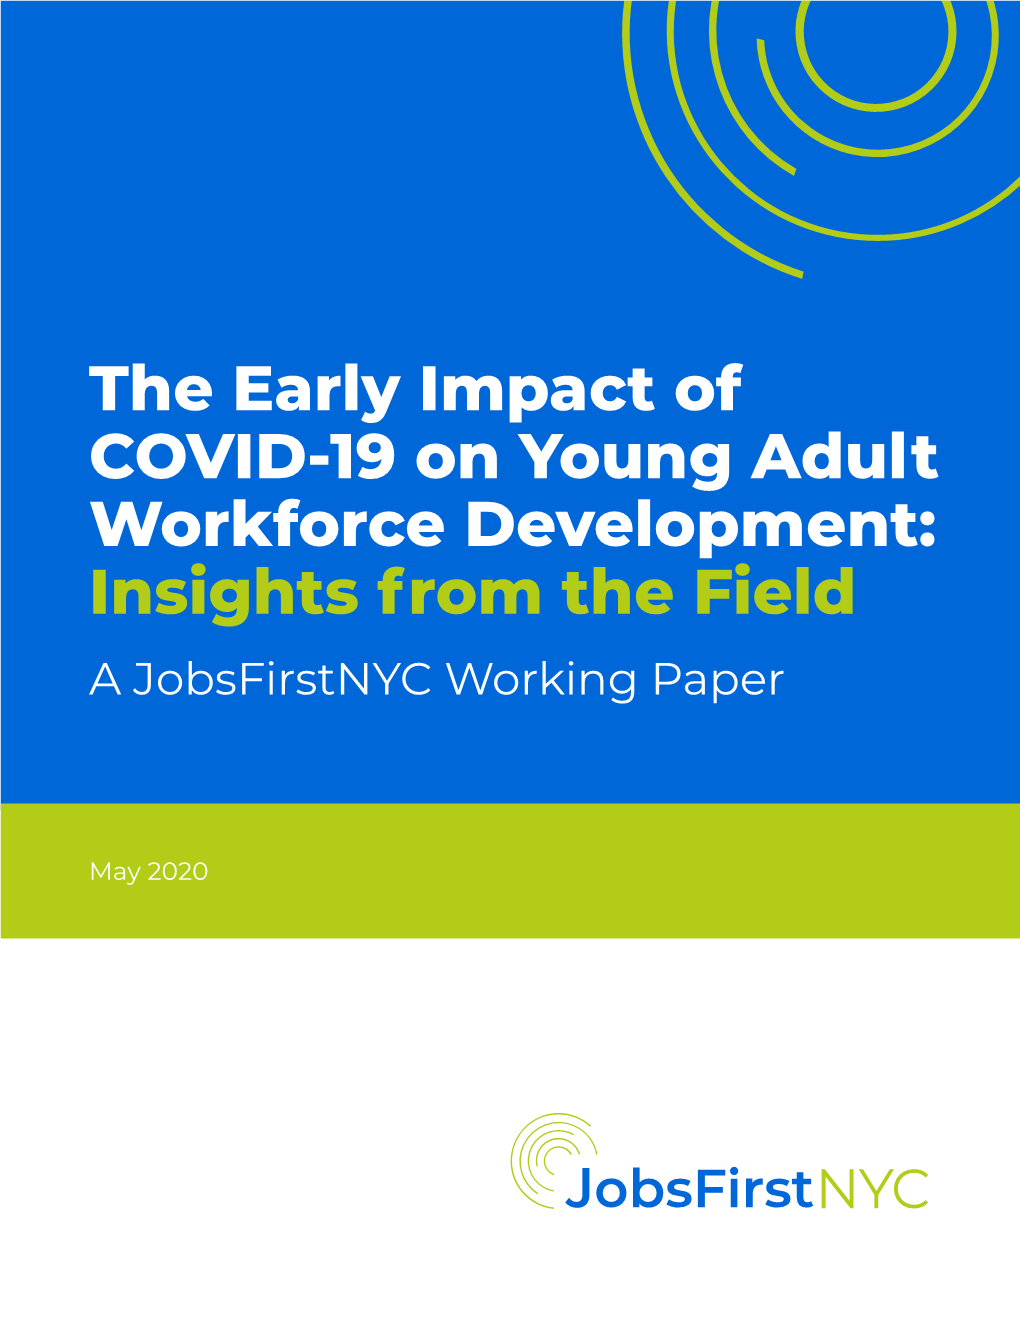 The Early Impact of COVID-19 on Young Adult Workforce Development: Insights from the Field a Jobsfirstnyc Working Paper